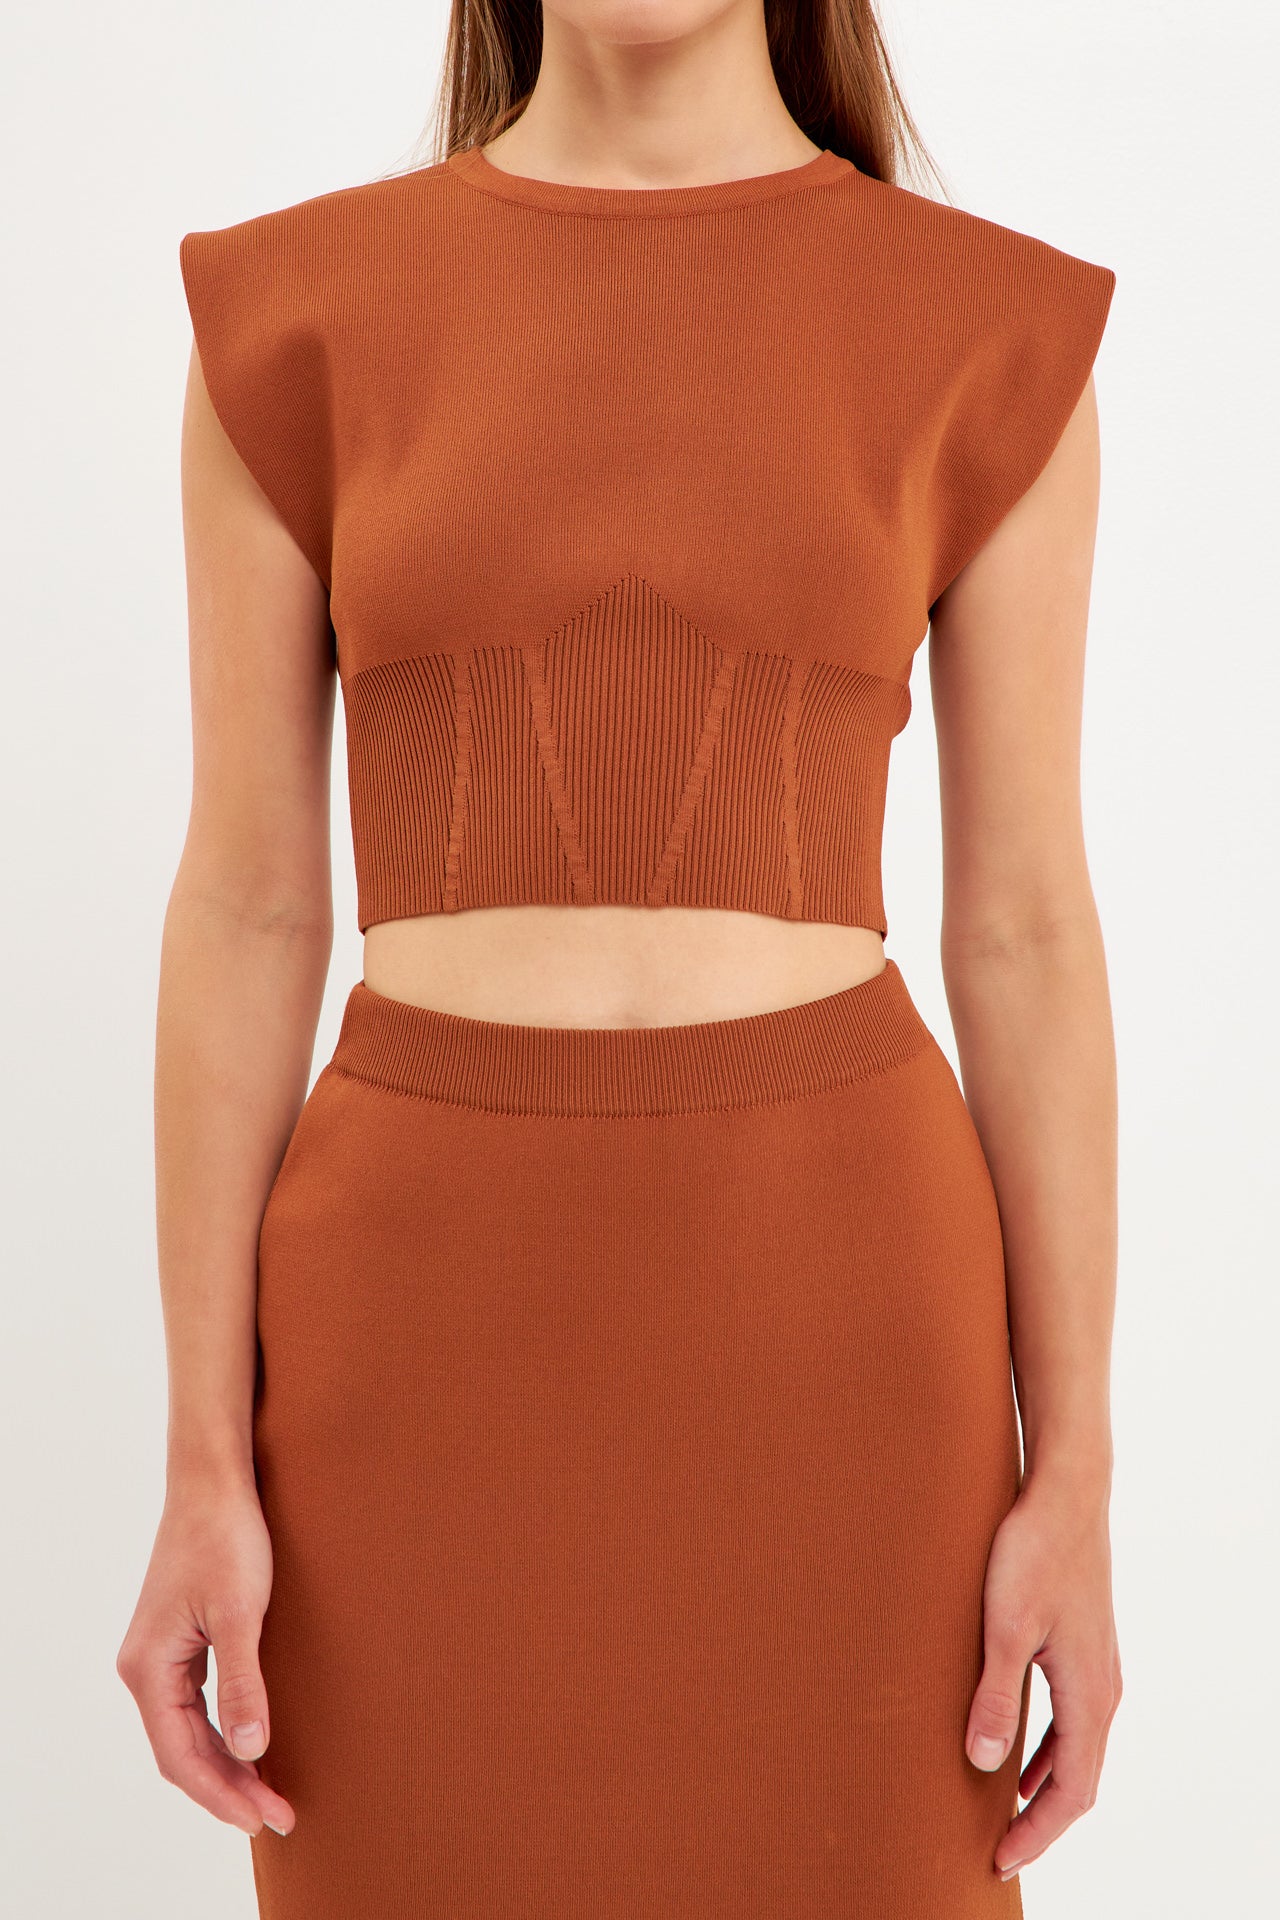 ENDLESS ROSE - Cinched Waist Sleeveless Knit Top - TOPS available at Objectrare